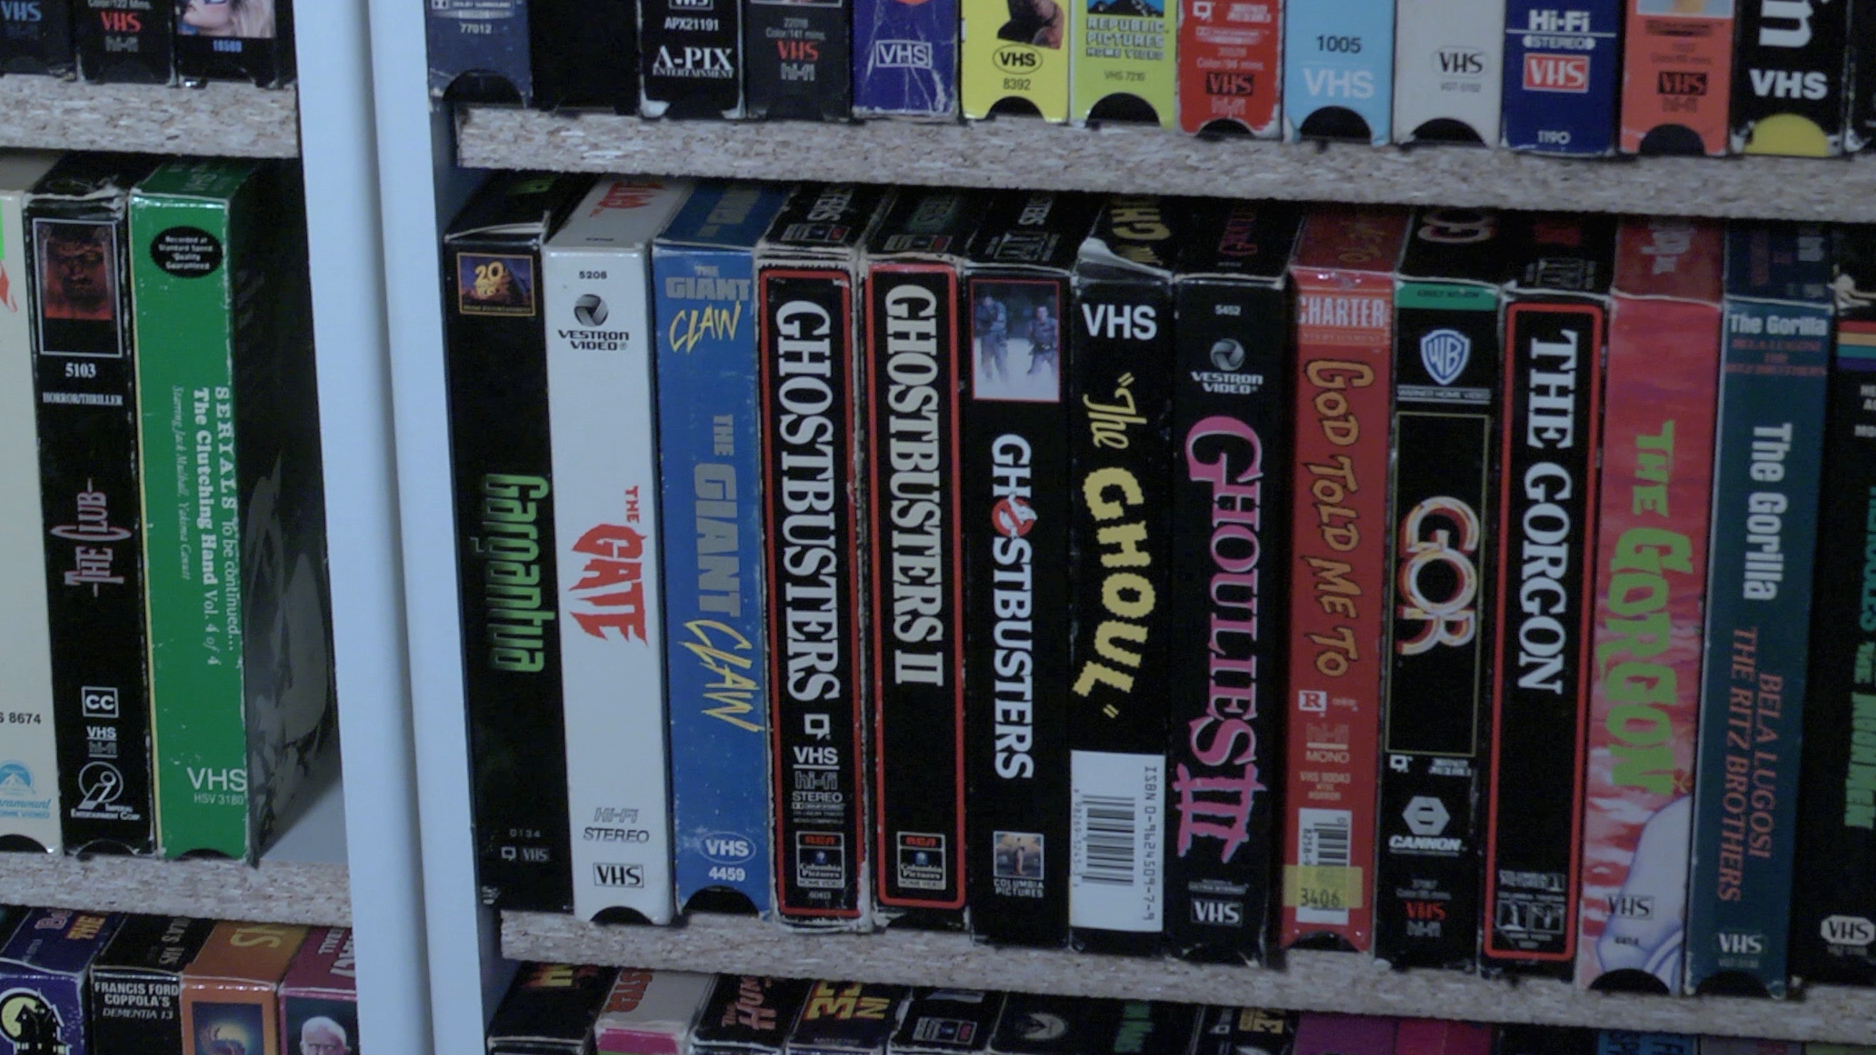 Mike’s VHS Collection.